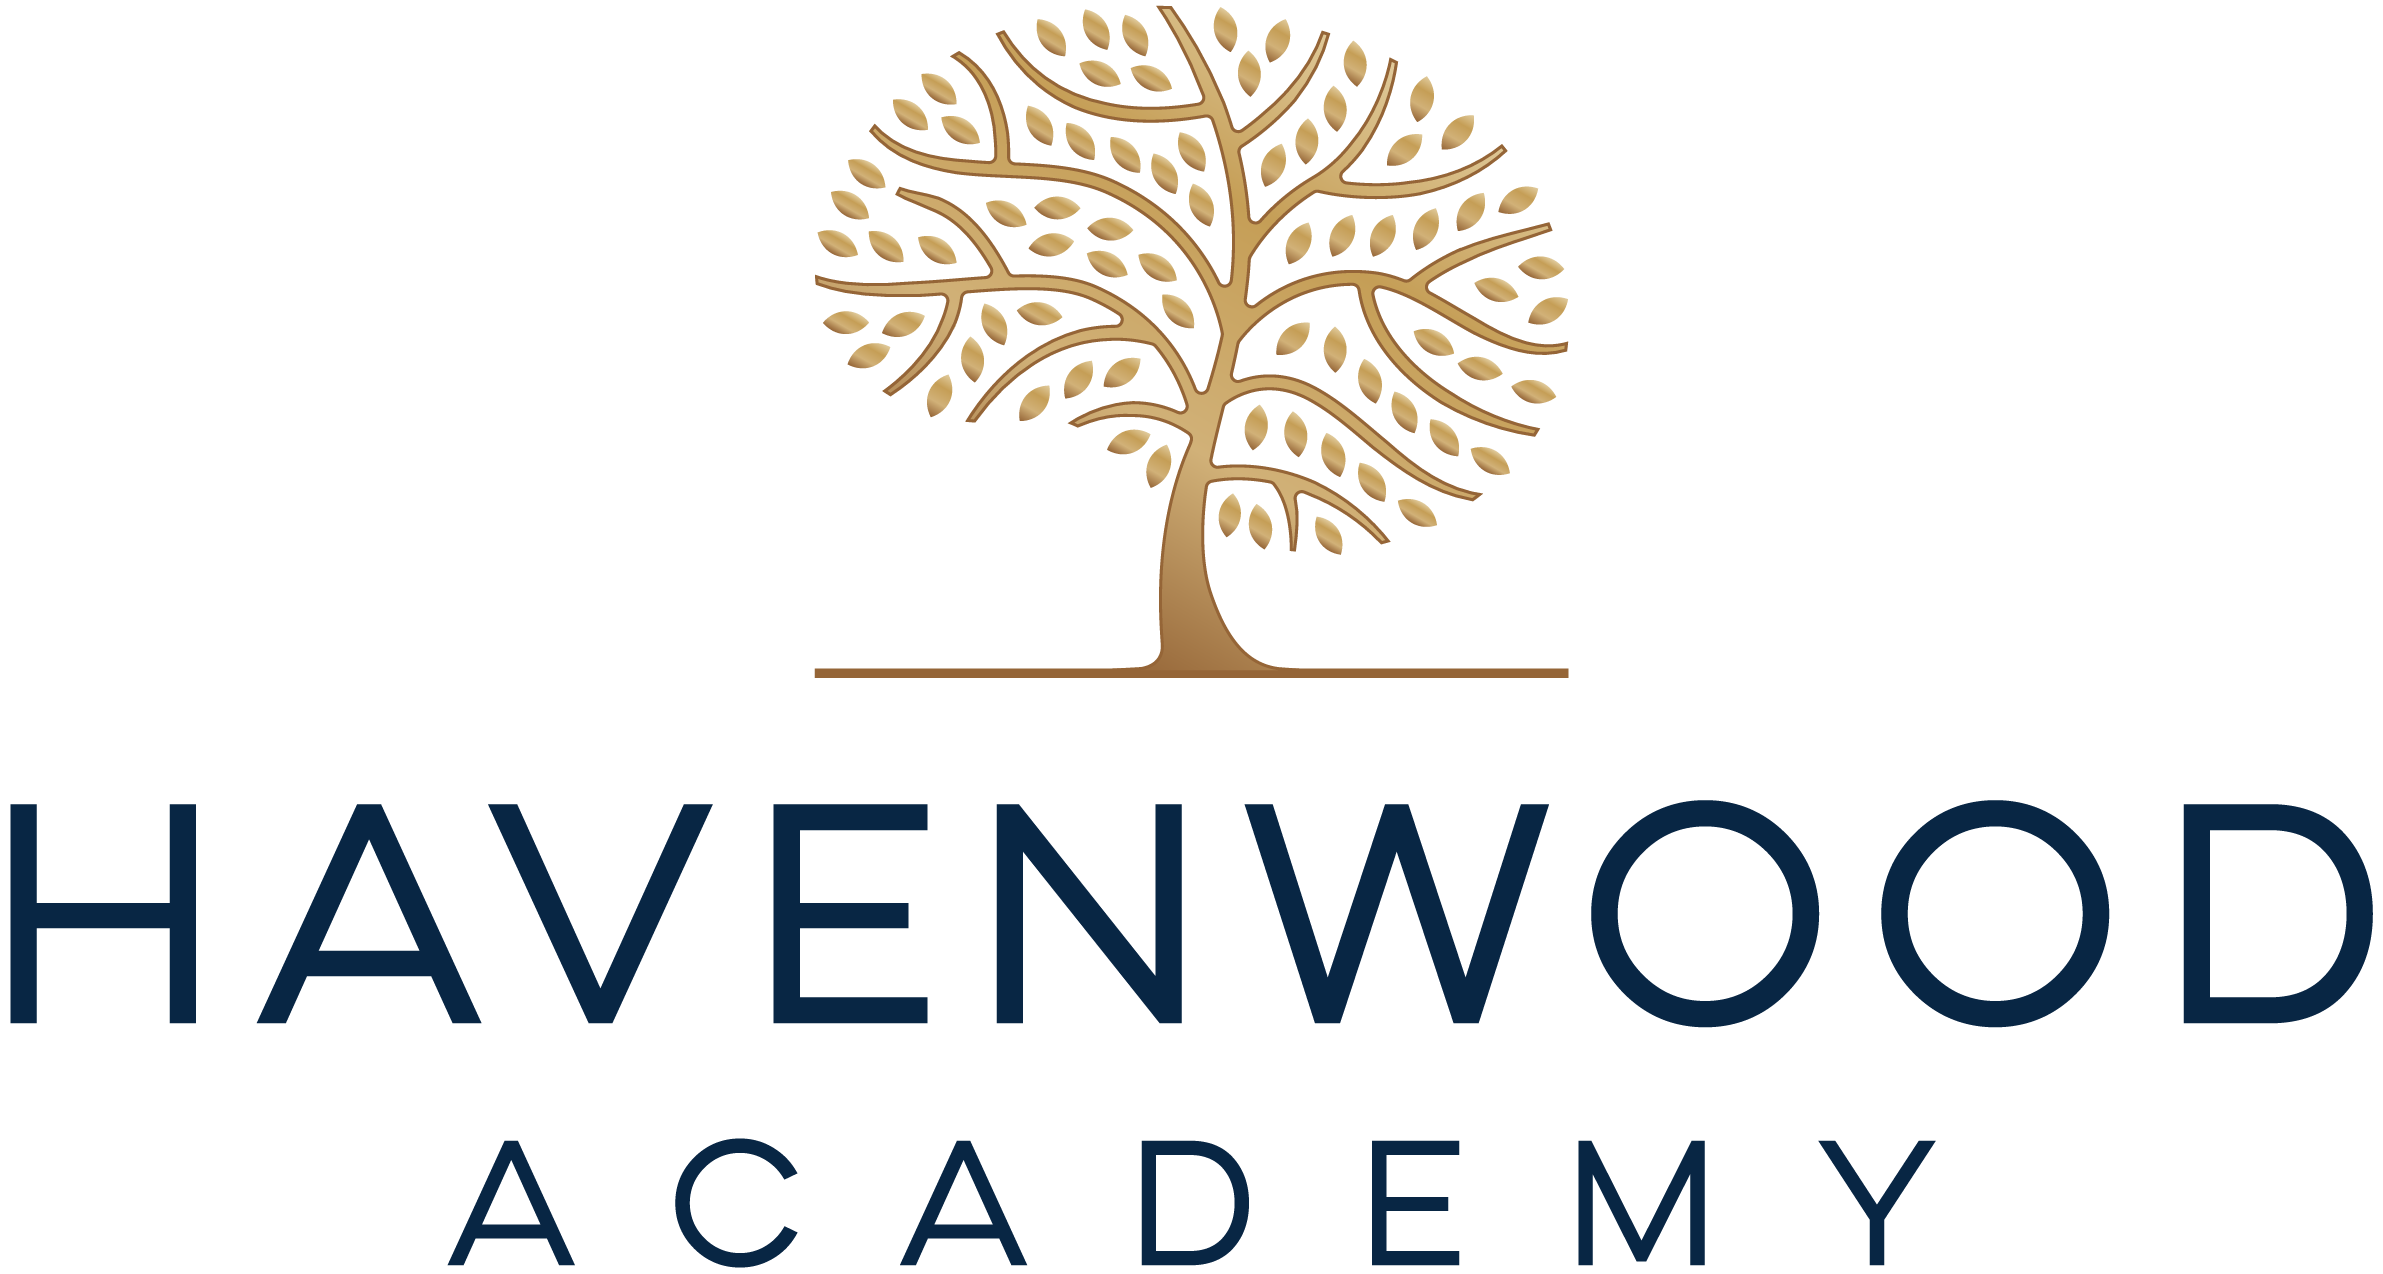 Havenwood Academy logo which is owned by the Hope Group the owner of the Eagle's Nest Ranch